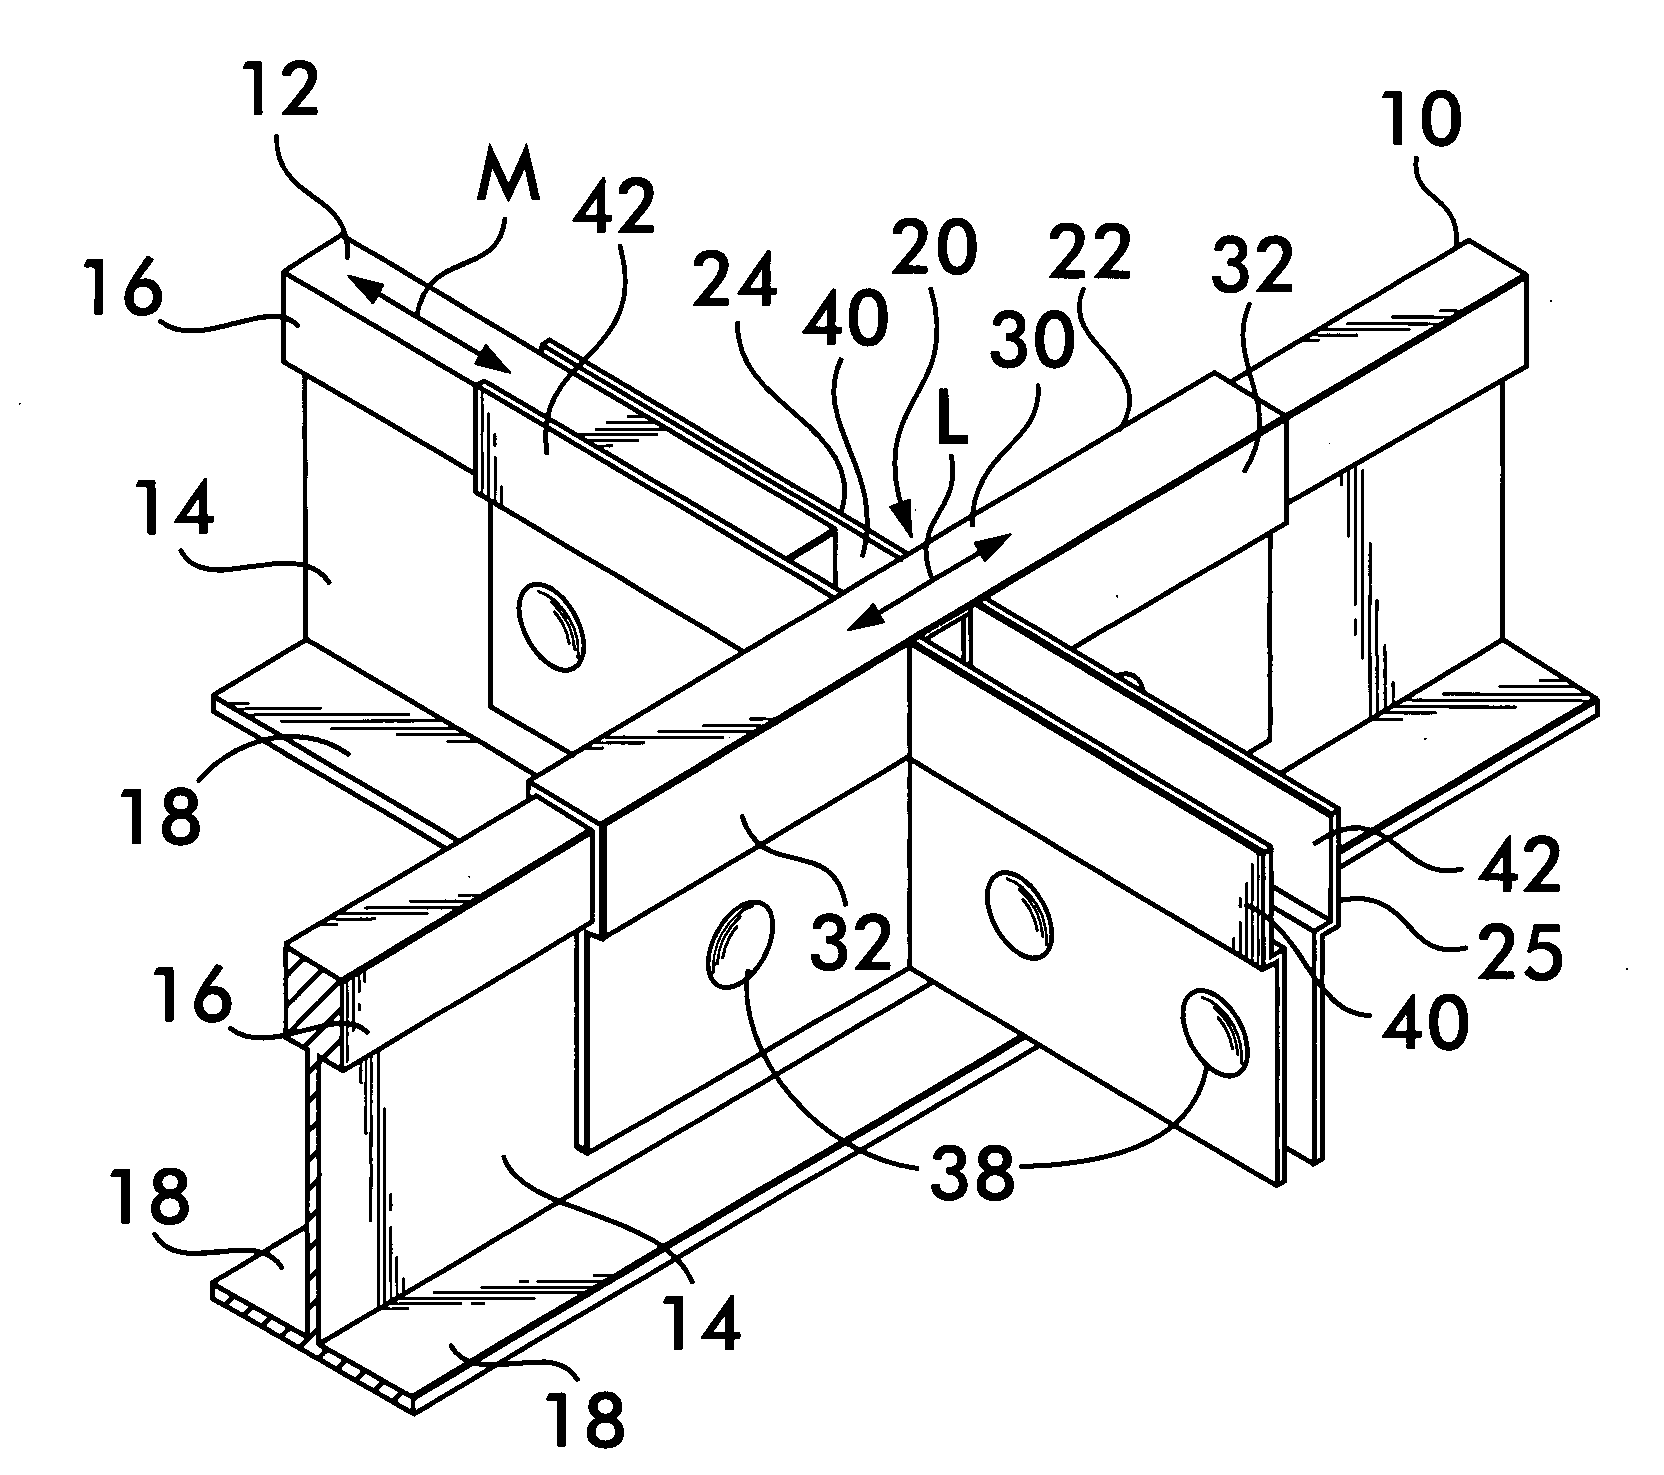 Suspended ceiling grid network utilizing seismic separation joint clips